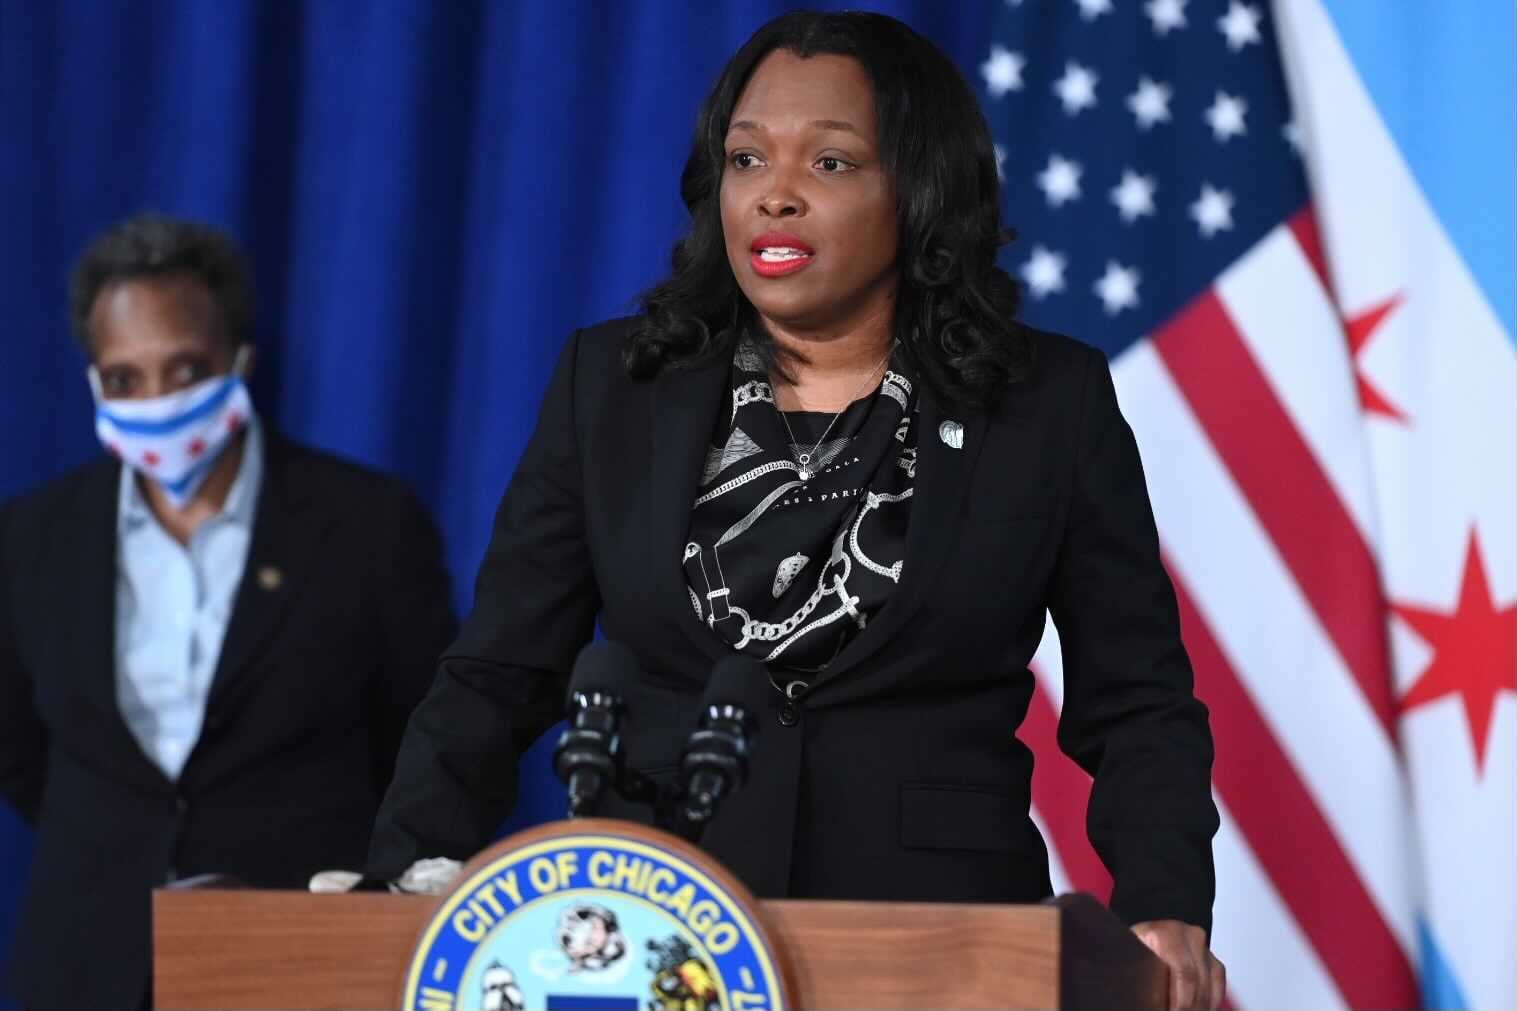 Schools chief Janice Jackson stands at a podium while giving an address announcing her departure. To the left, in the backgrond, is Mayor Lori Lightfoot wearing a mask. To the right are overlapping American and Chicago flags.